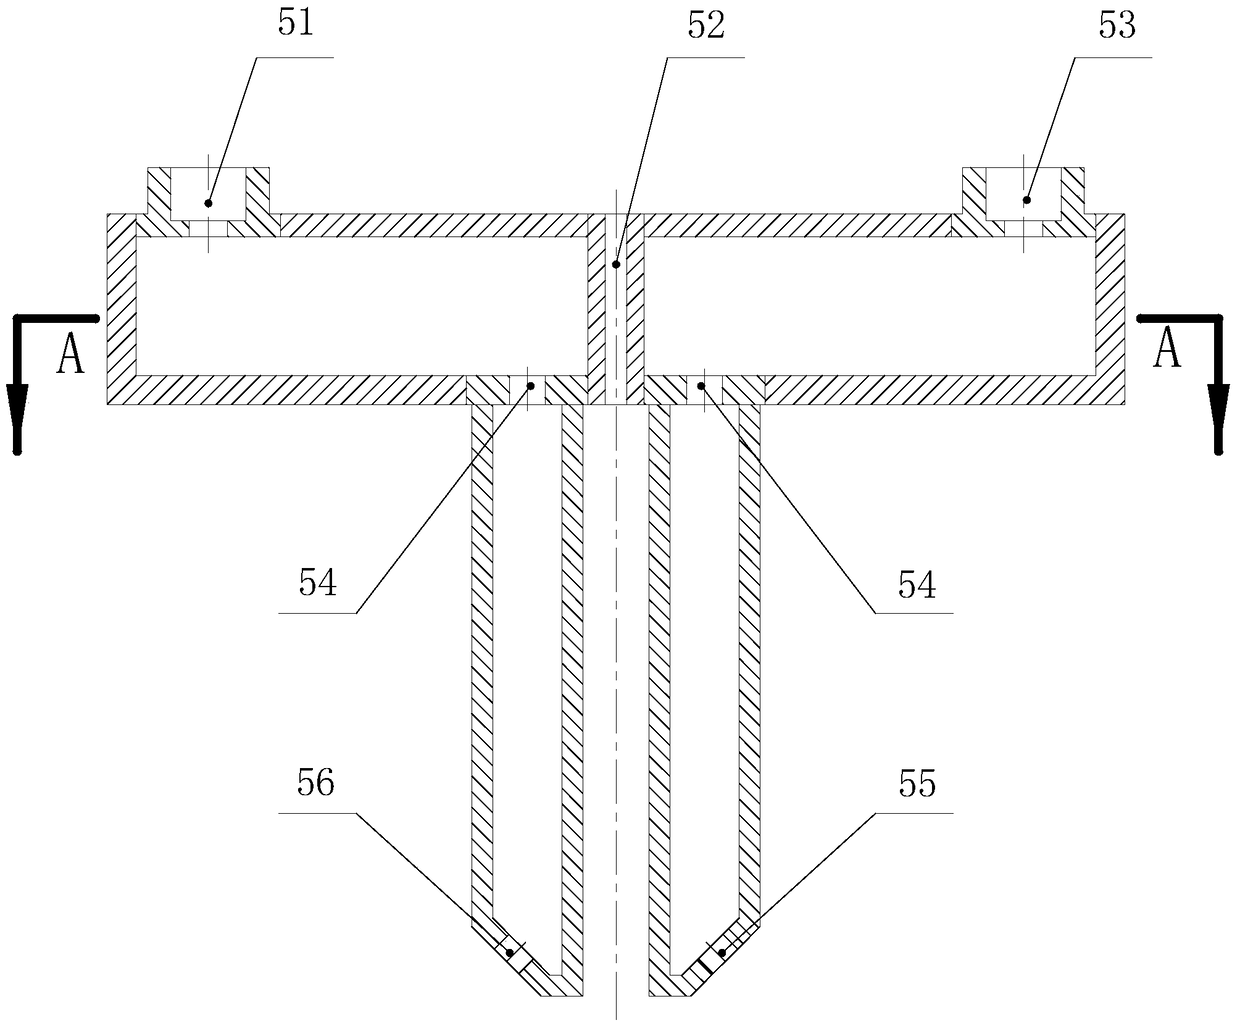 Continuous casting and rolling method for manufacturing mesh reinforced sandwich composite material by using solid-liquid casting and rolling equipment